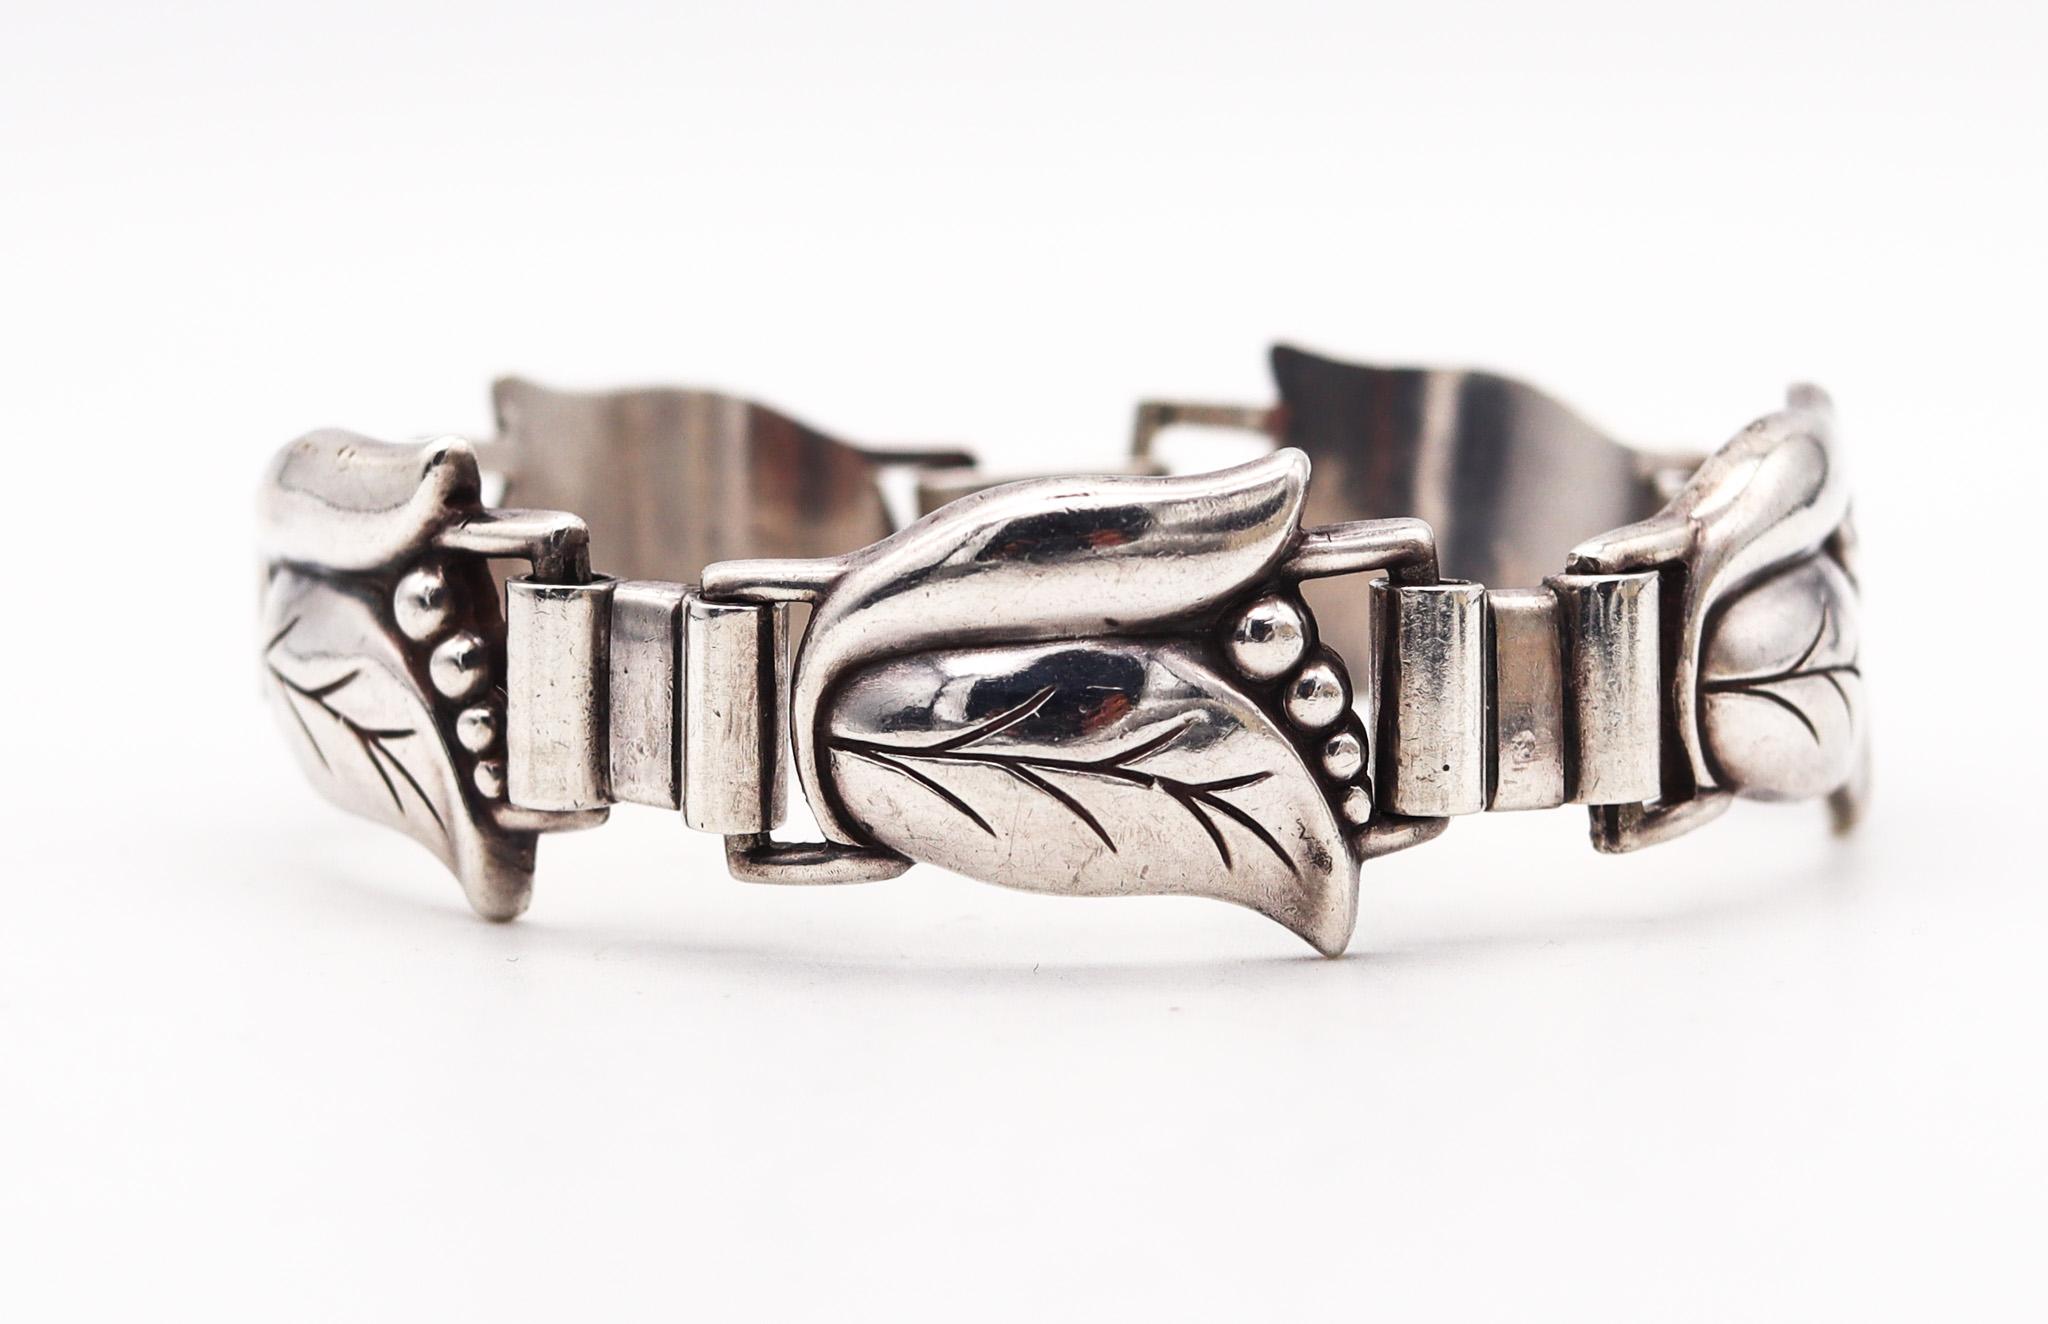 Art deco bracelet designed by Alphonse La Paglia for Georg Jensen.

This is a beautiful bracelet, created by the silversmith and designer Alphonse La Paglia for the Georg Jensen company, back in the 1940. This bracelet has been crafted in the art